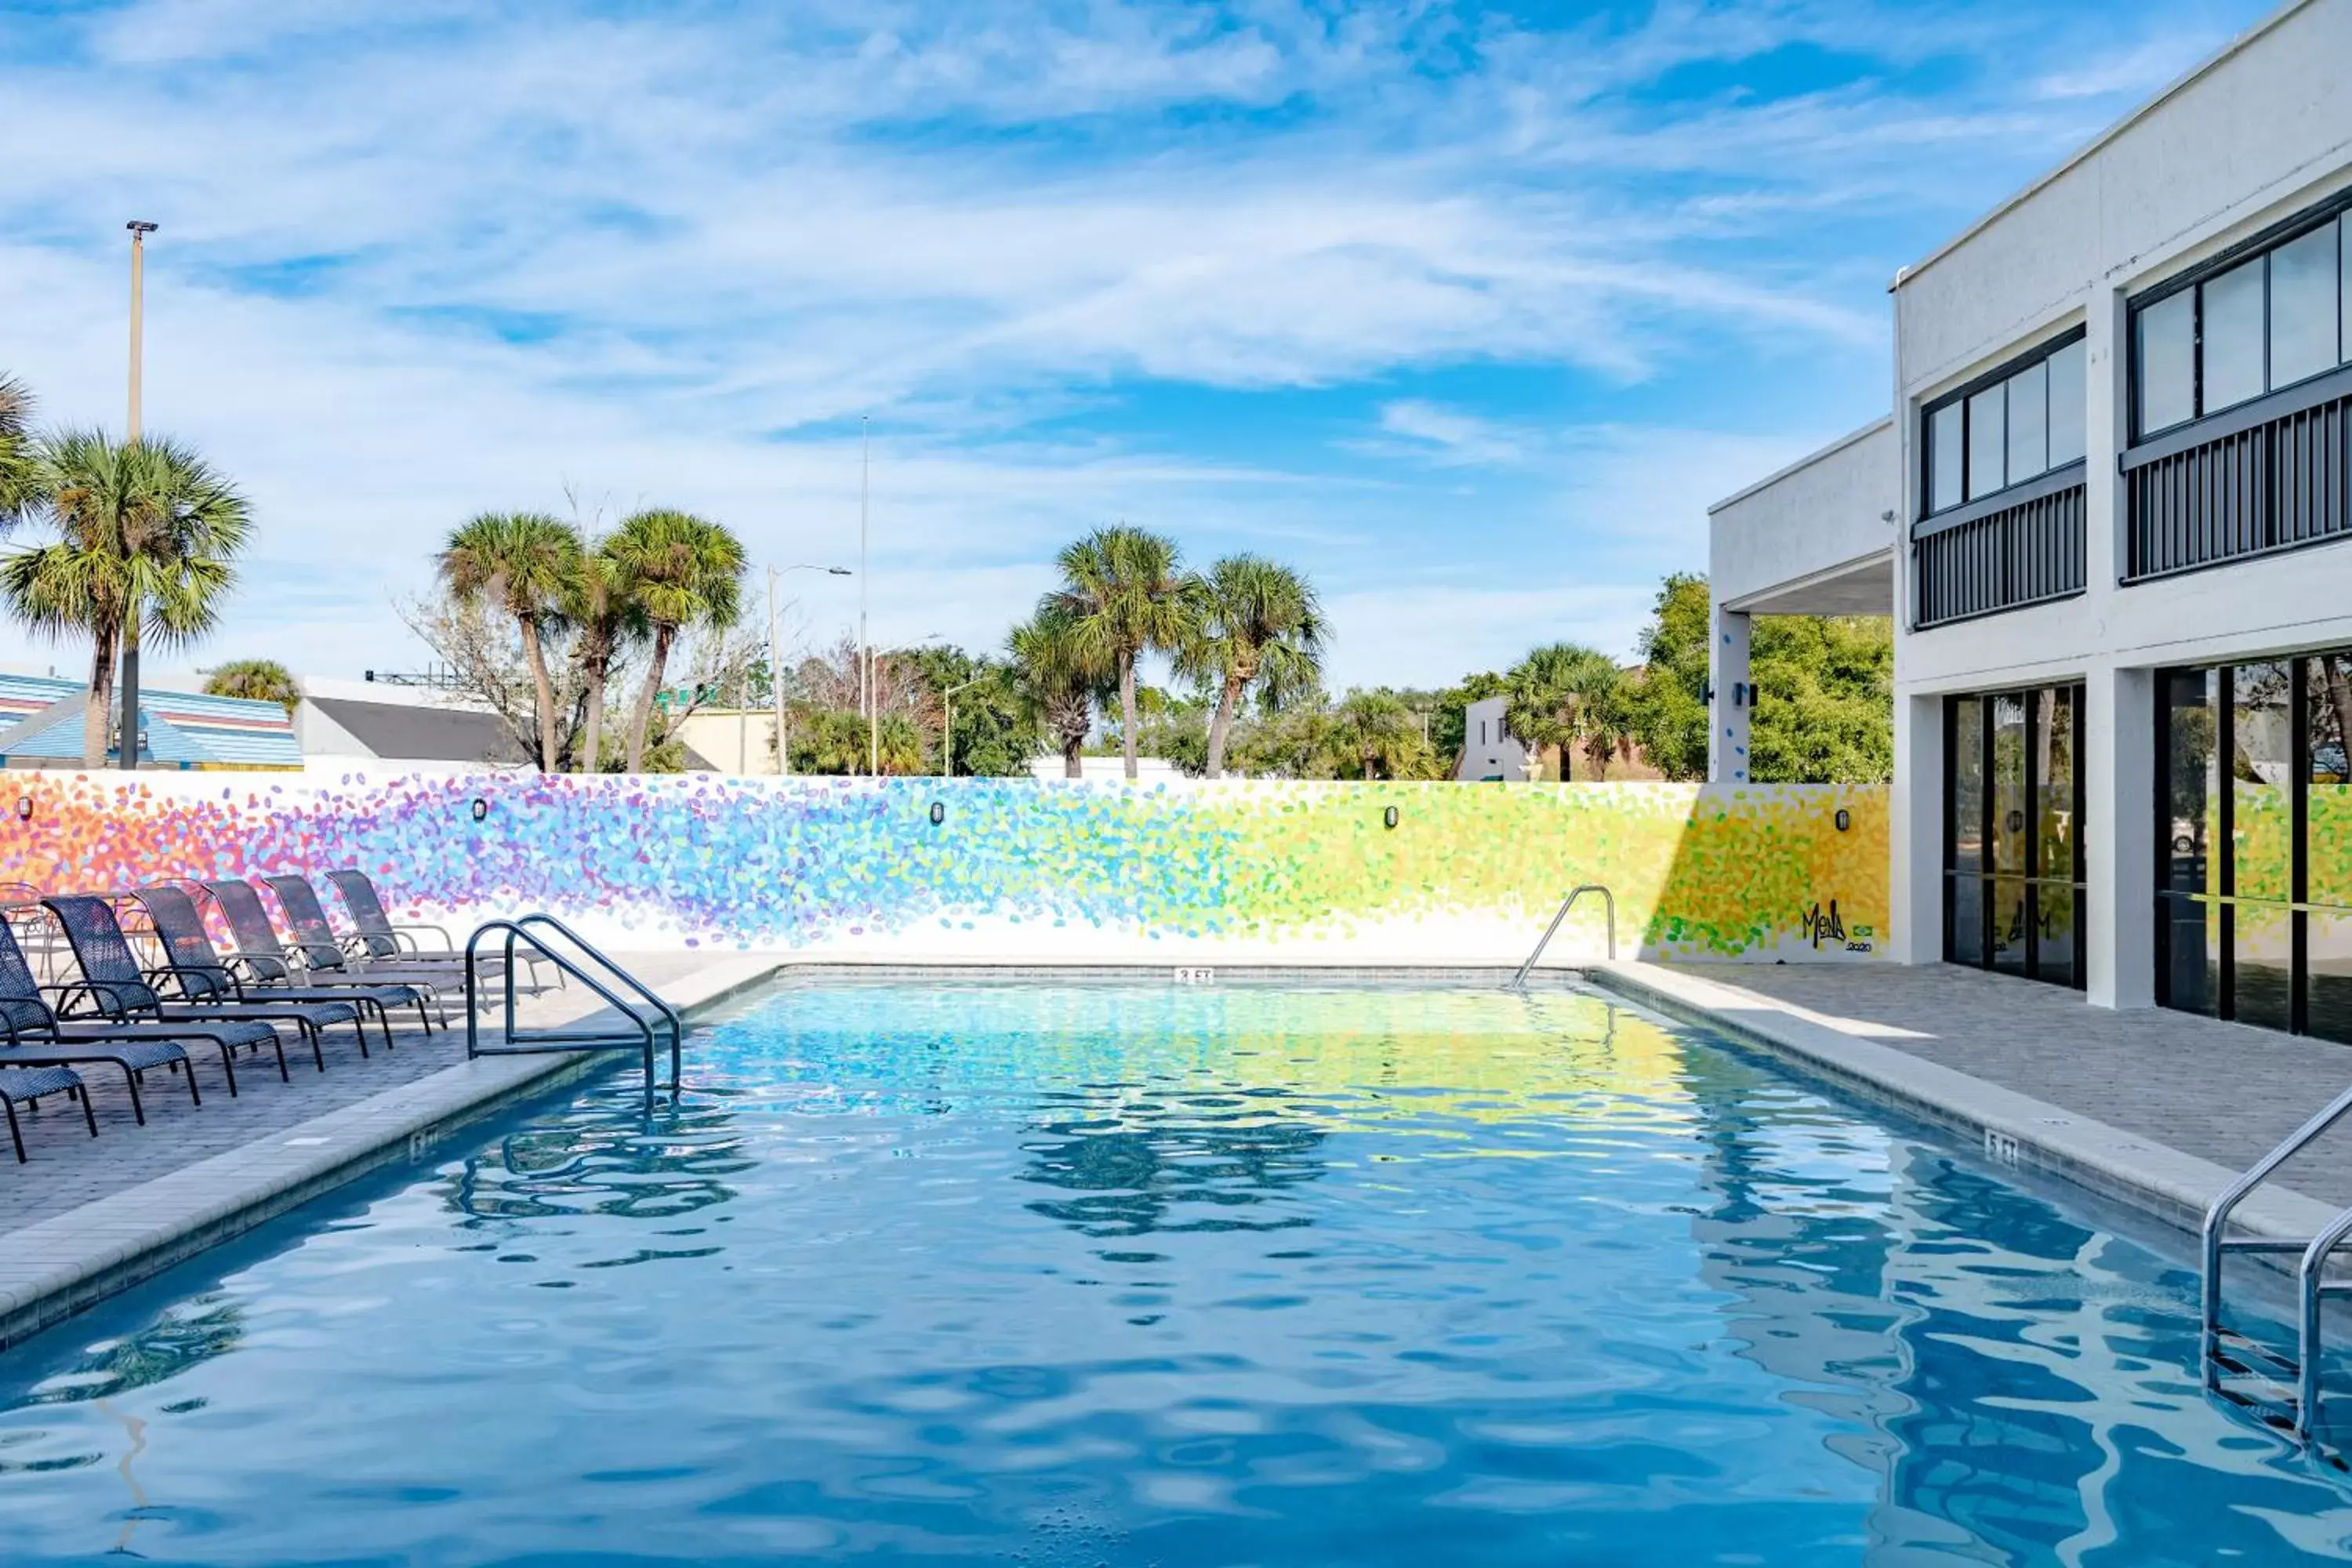 Property building, Swimming Pool in Hotel Monreale Express International Drive Orlando